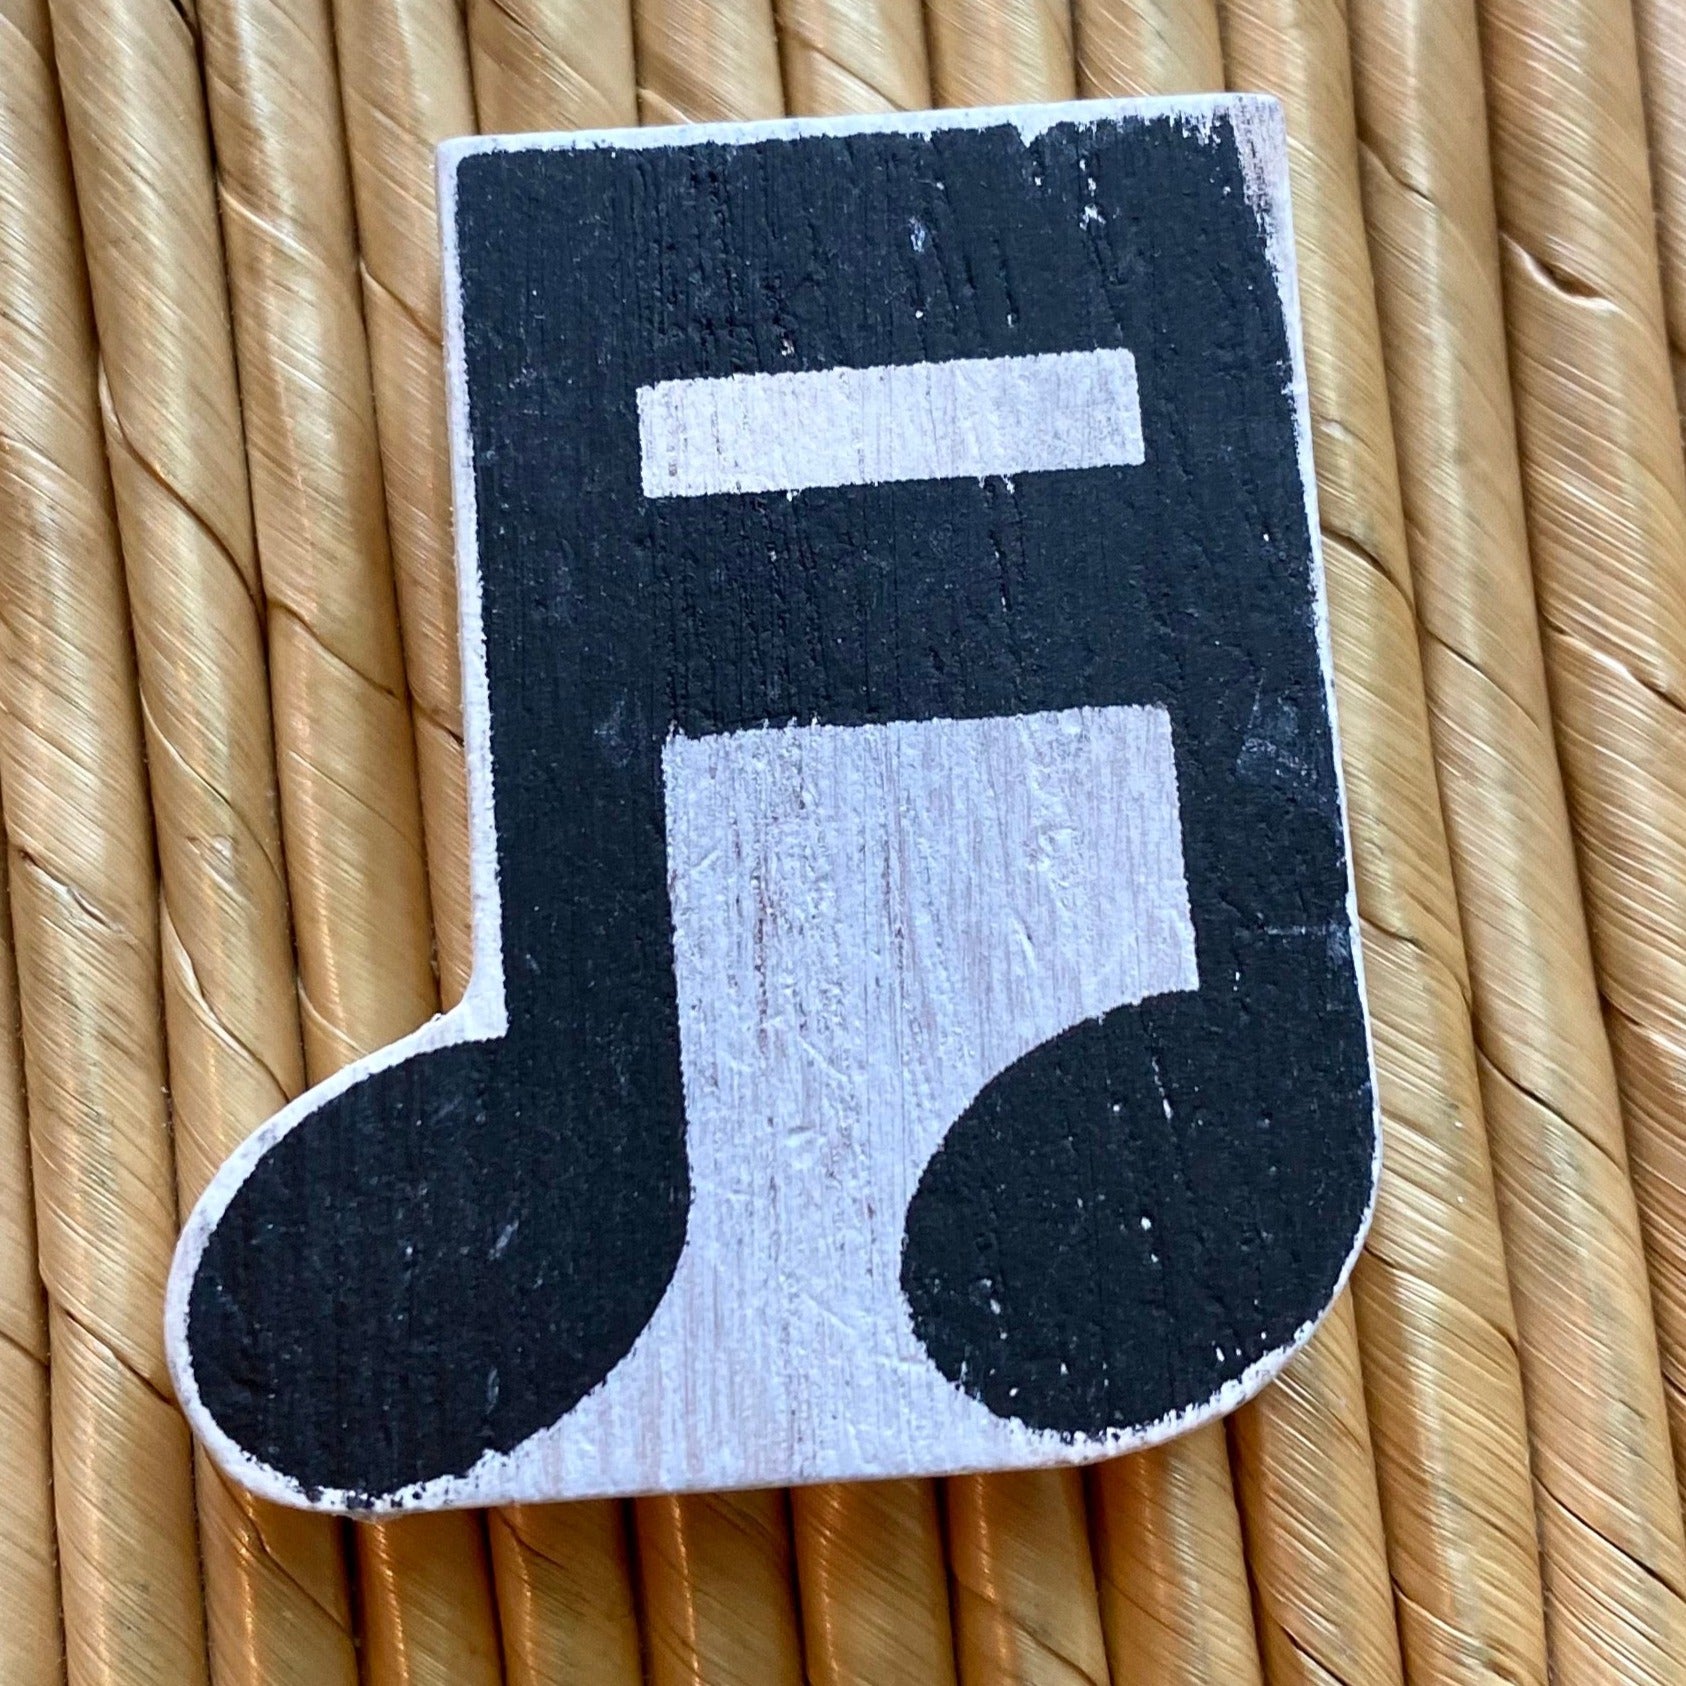 music note adams tile shape cutout for letterboard